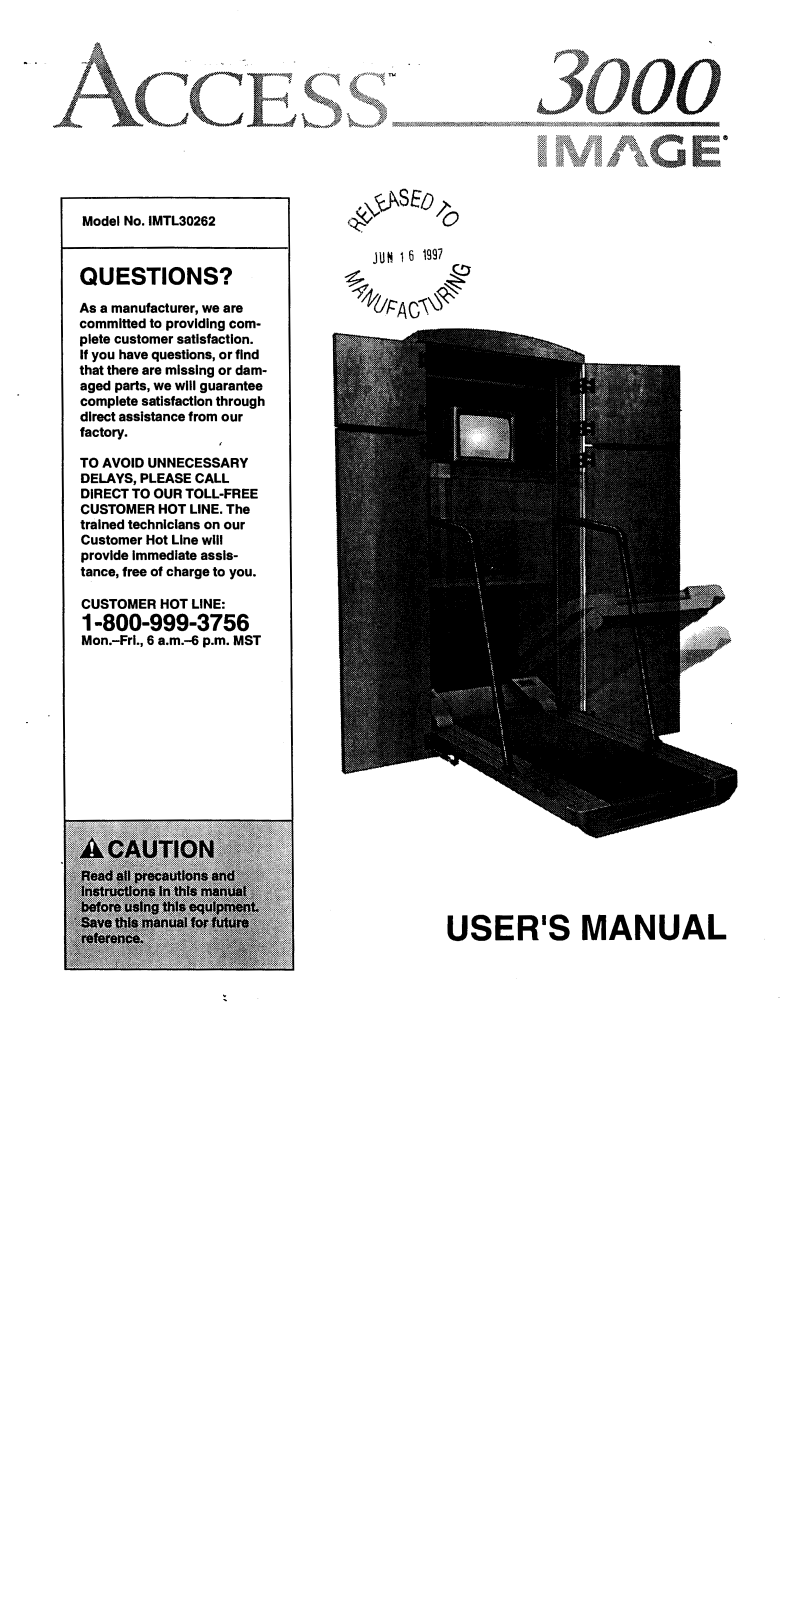 Image IMTL30262 Owner's Manual